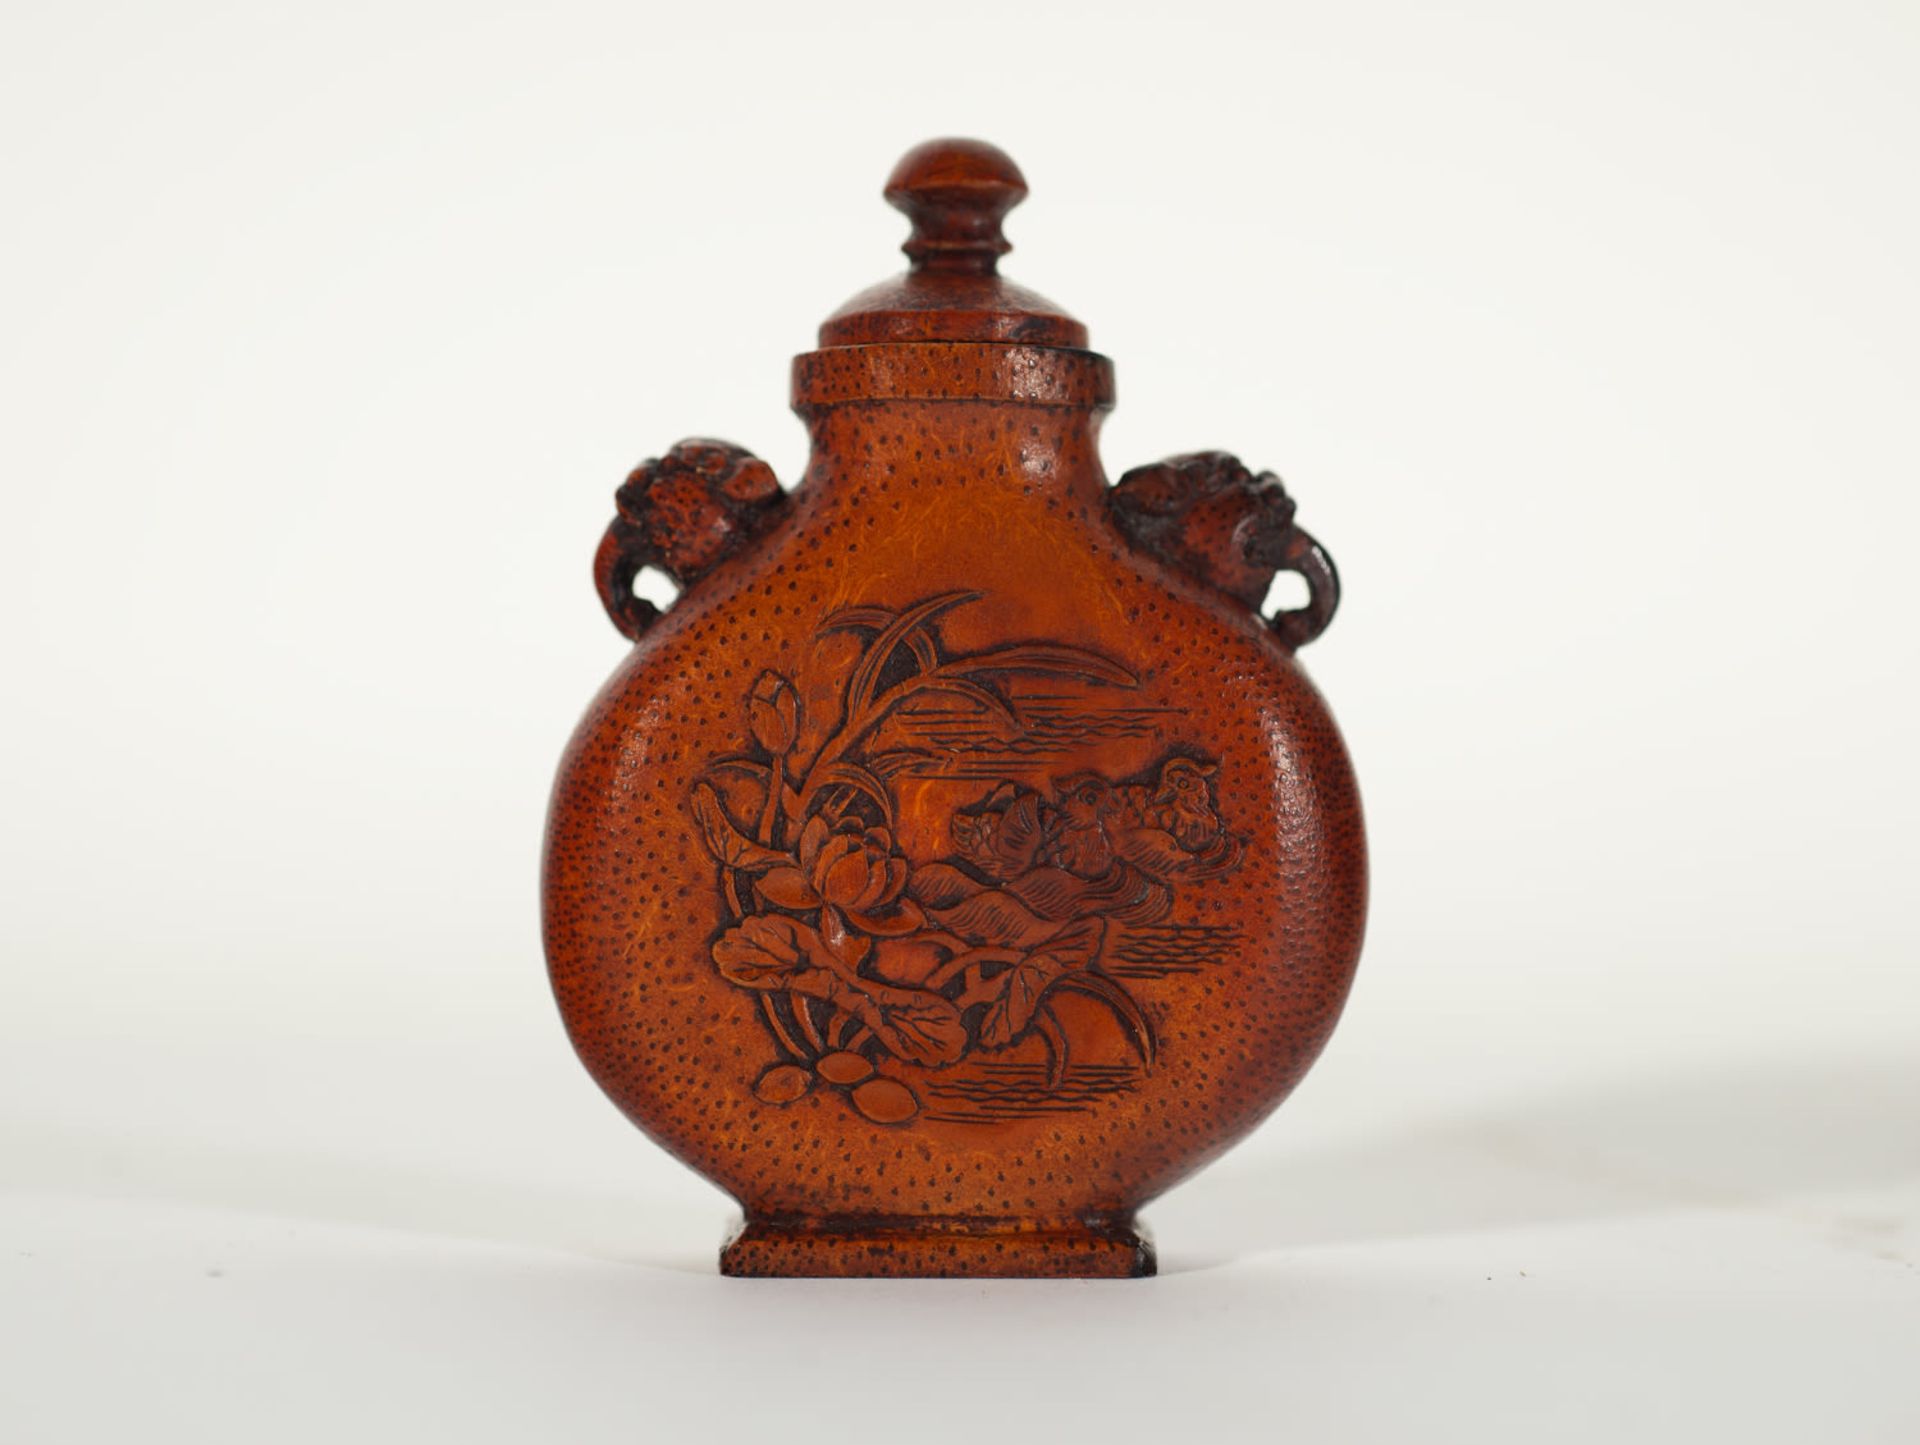 Fine Chinese Imperial Snuff Bottle in Bamboo, Daoguang mark and period (1820-1850)